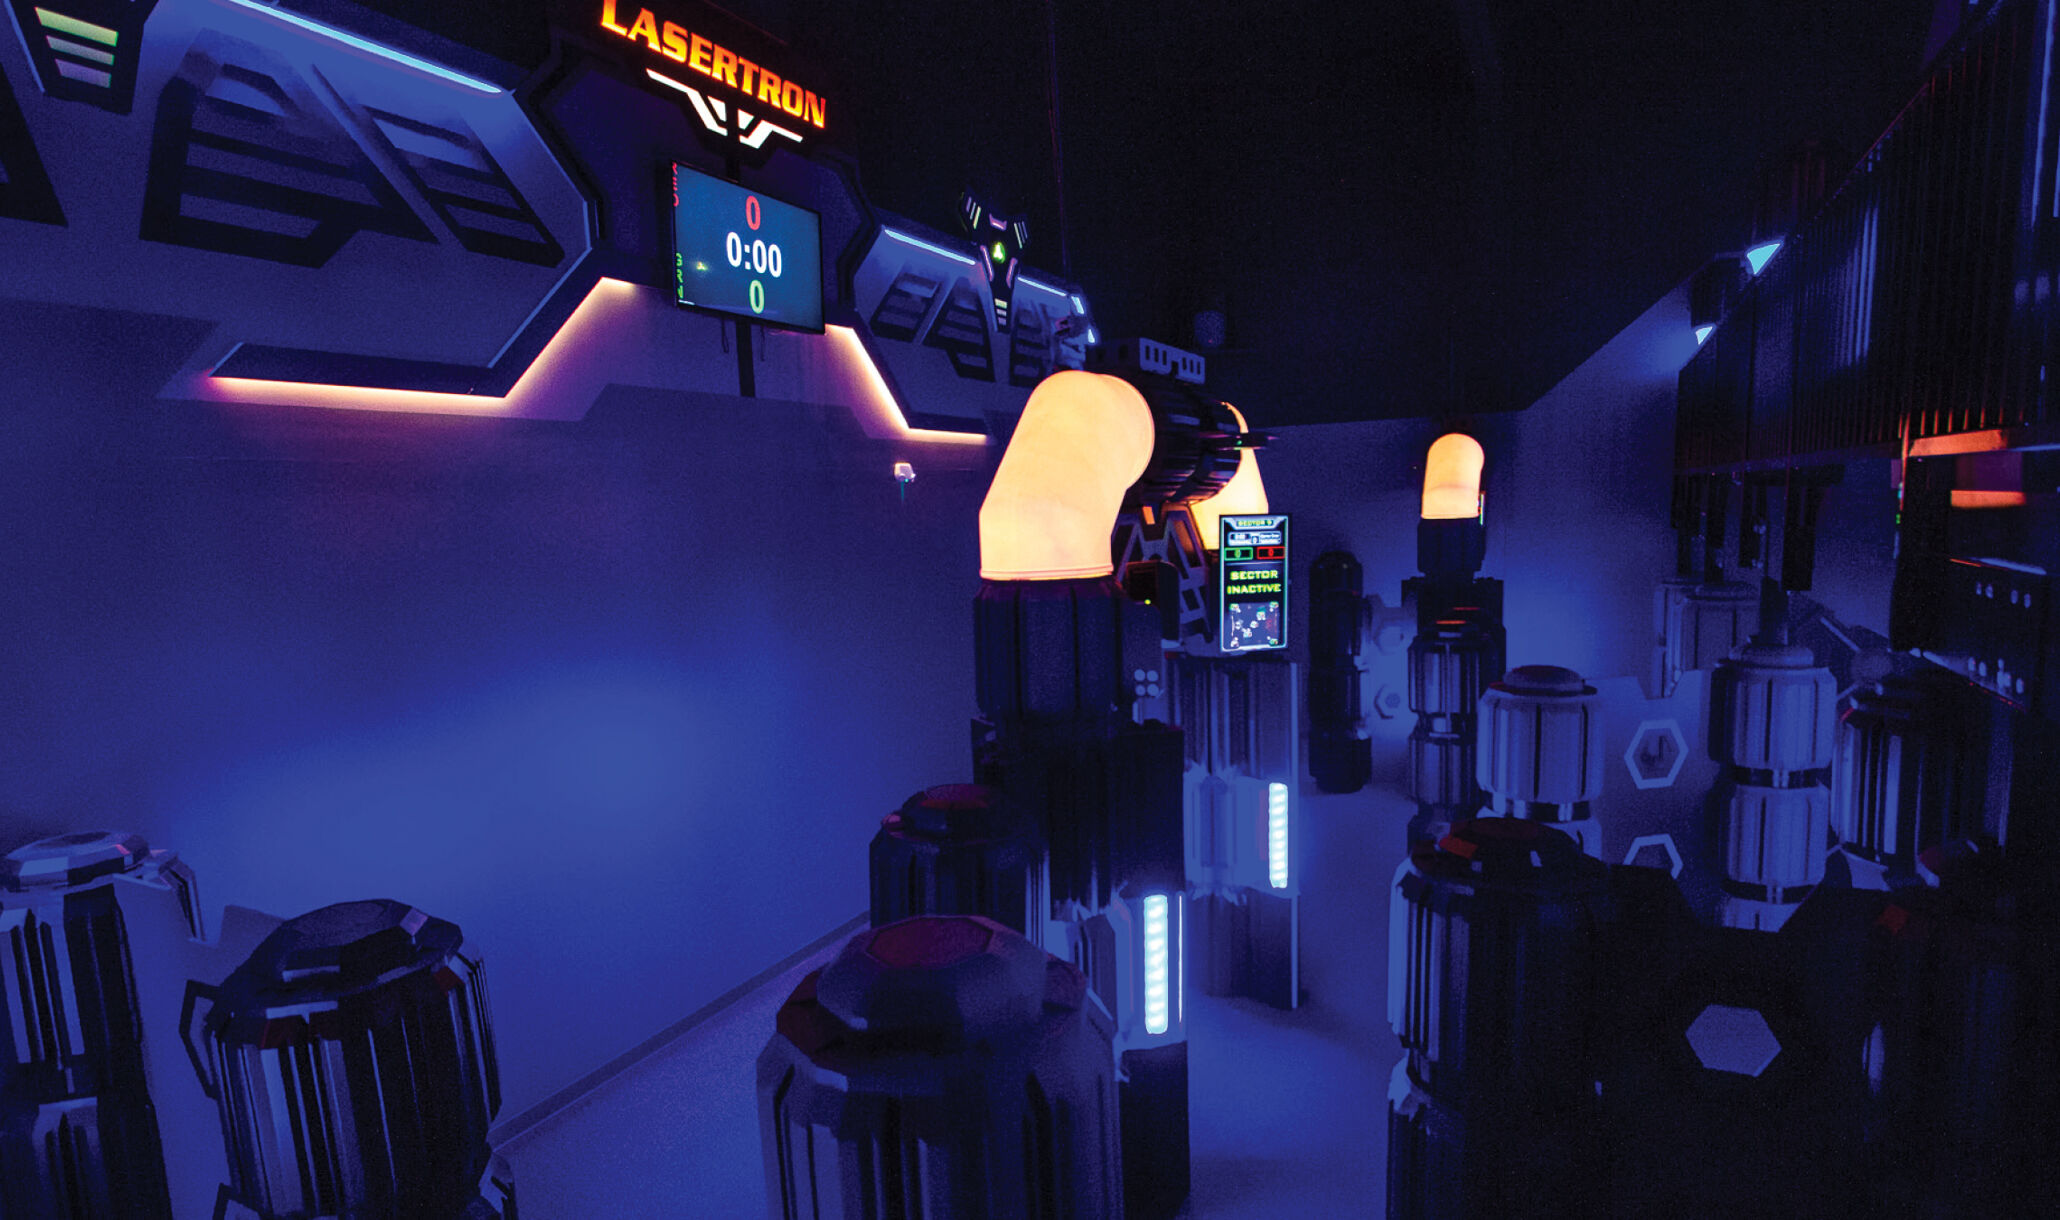 Up Your Alley, Schererville, IN - Laser Tag-1